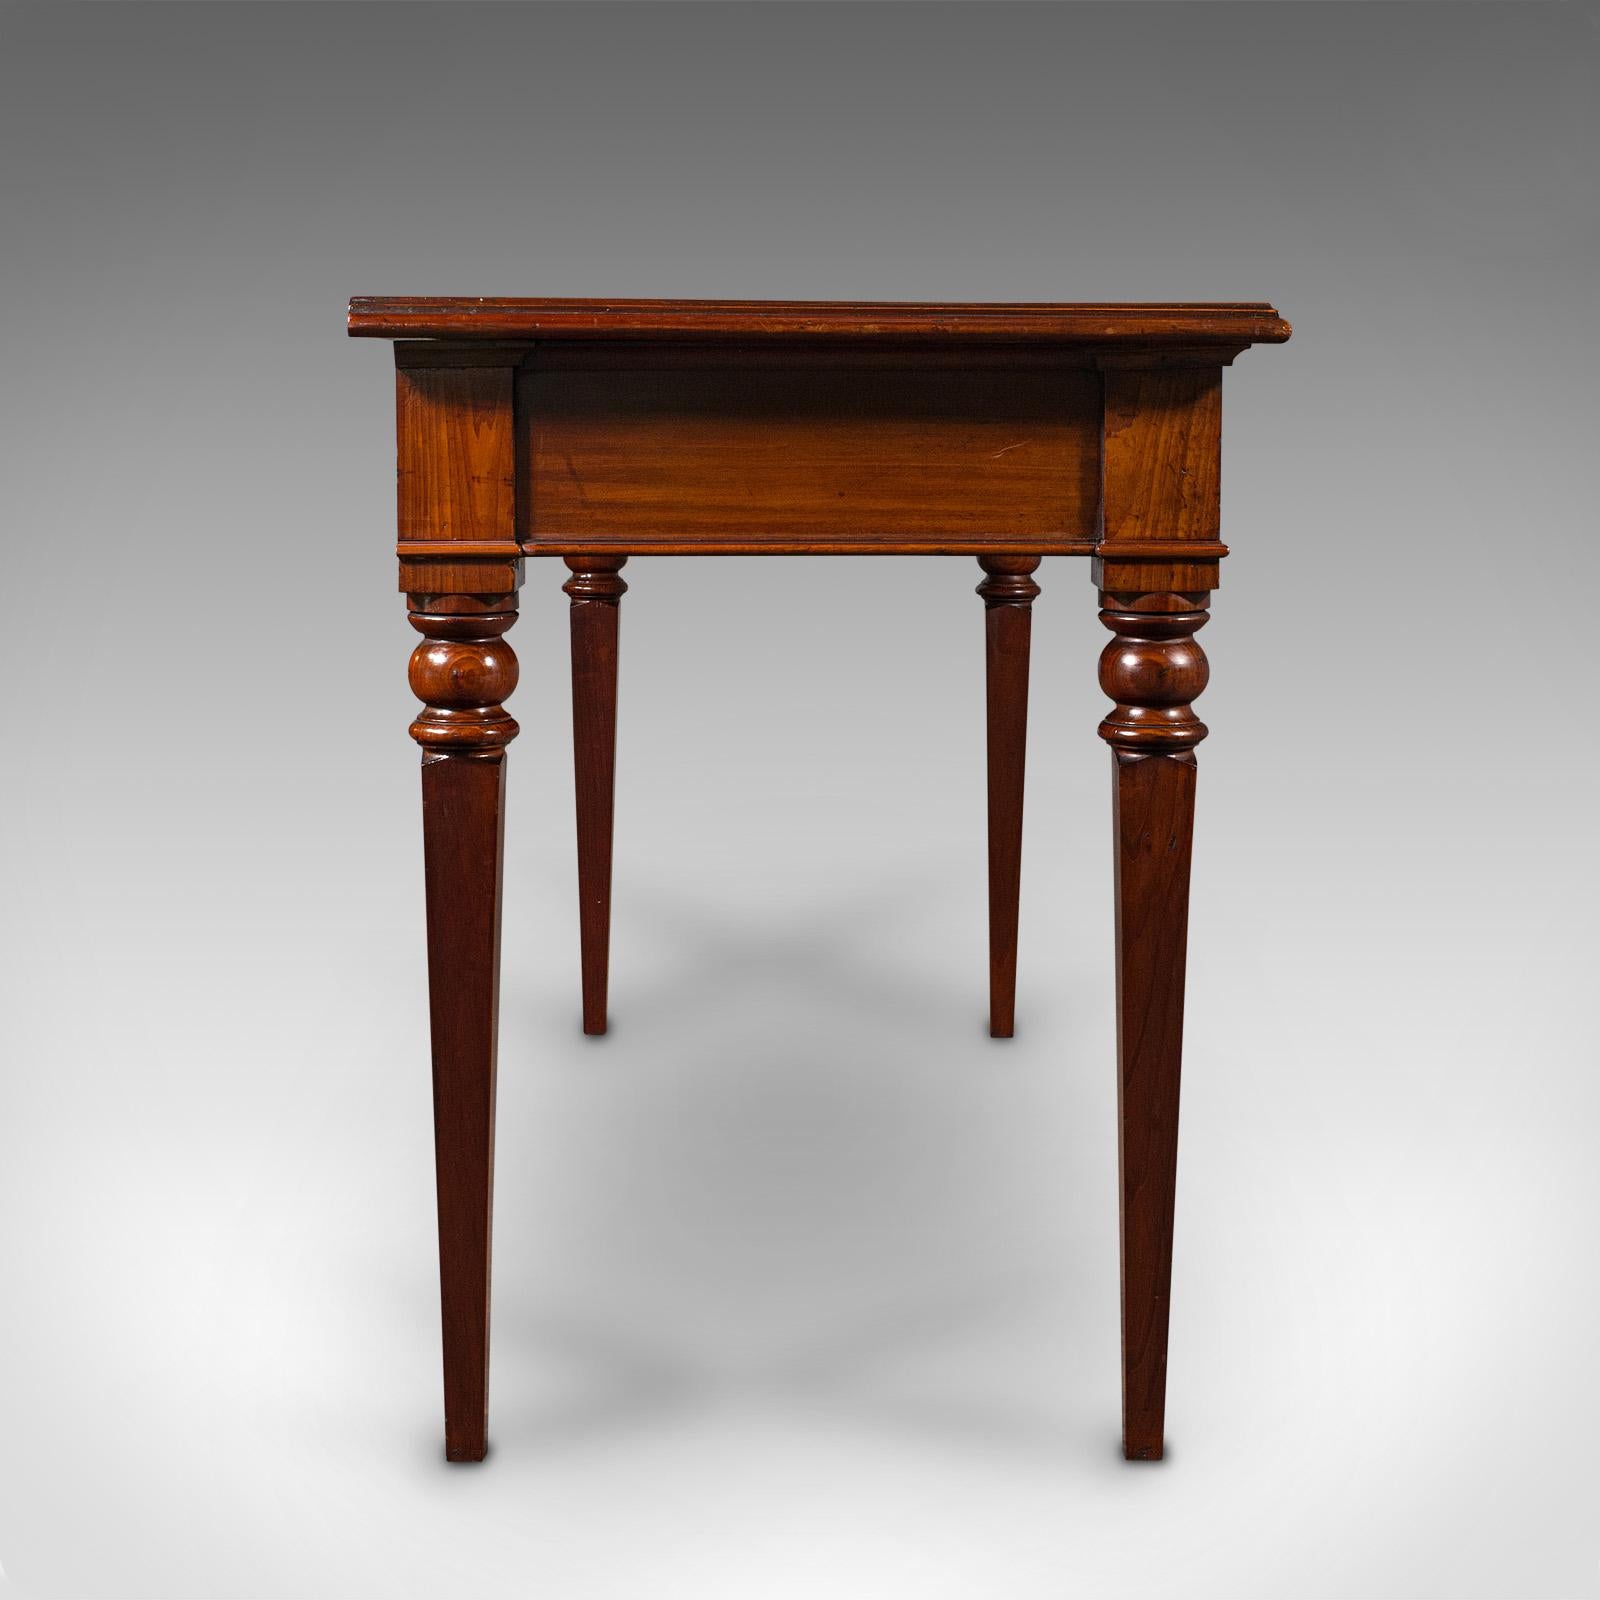 British Antique Writer's Desk, English, Inlay, Side, Serving Table, Georgian, C.1800 For Sale